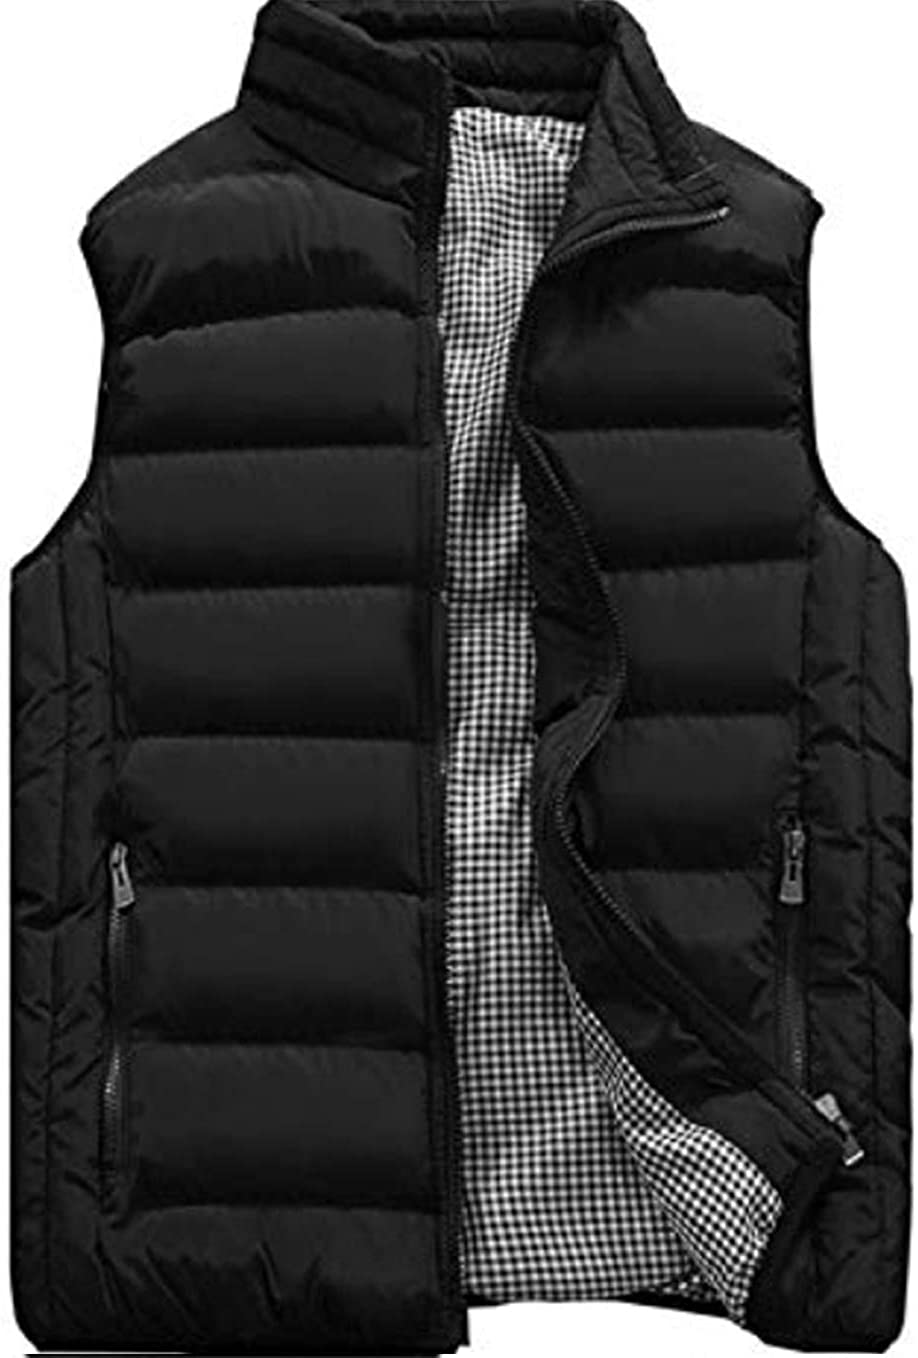 Mens Padded Down Vest Outdoor Puffer Jacket